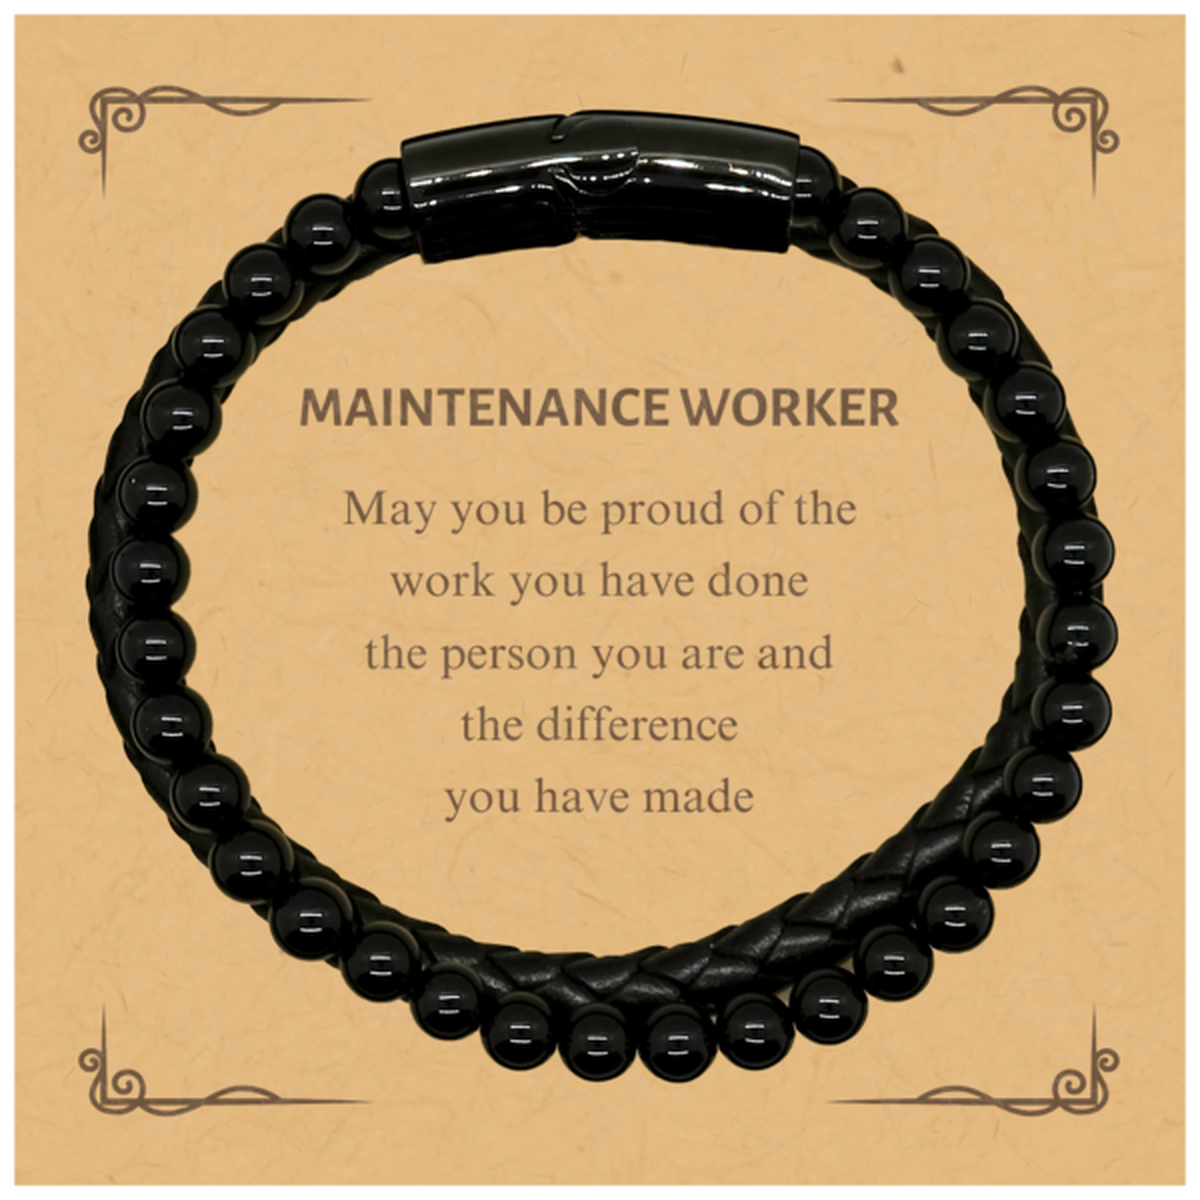 Maintenance Worker May you be proud of the work you have done, Retirement Maintenance Worker Stone Leather Bracelets for Colleague Appreciation Gifts Amazing for Maintenance Worker